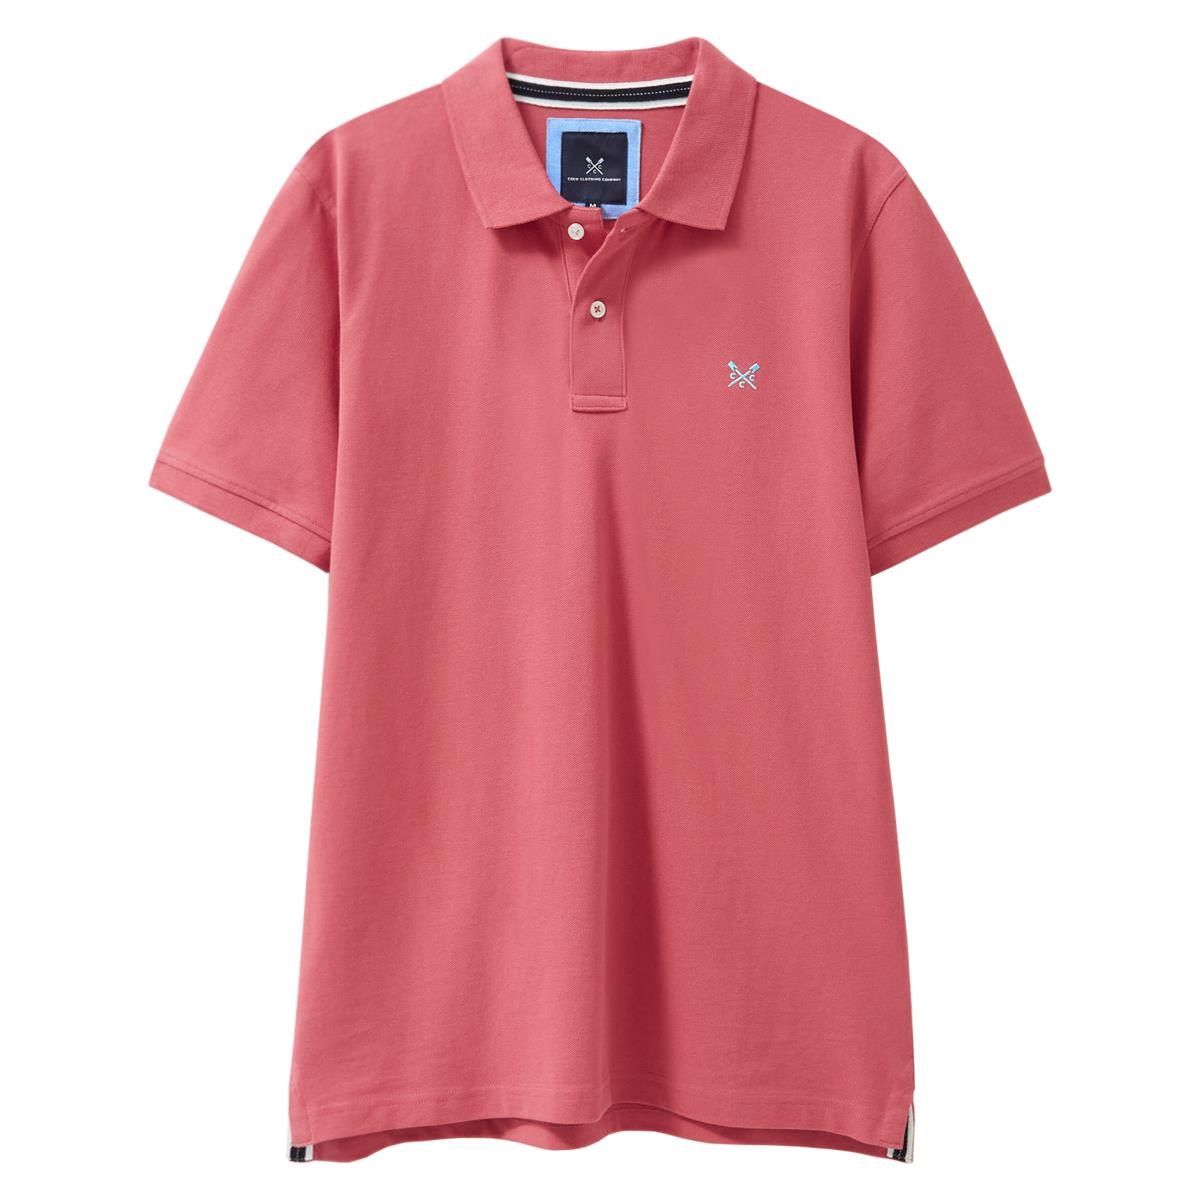 What is the PM reference number for Crew Clothing's polo shirt?